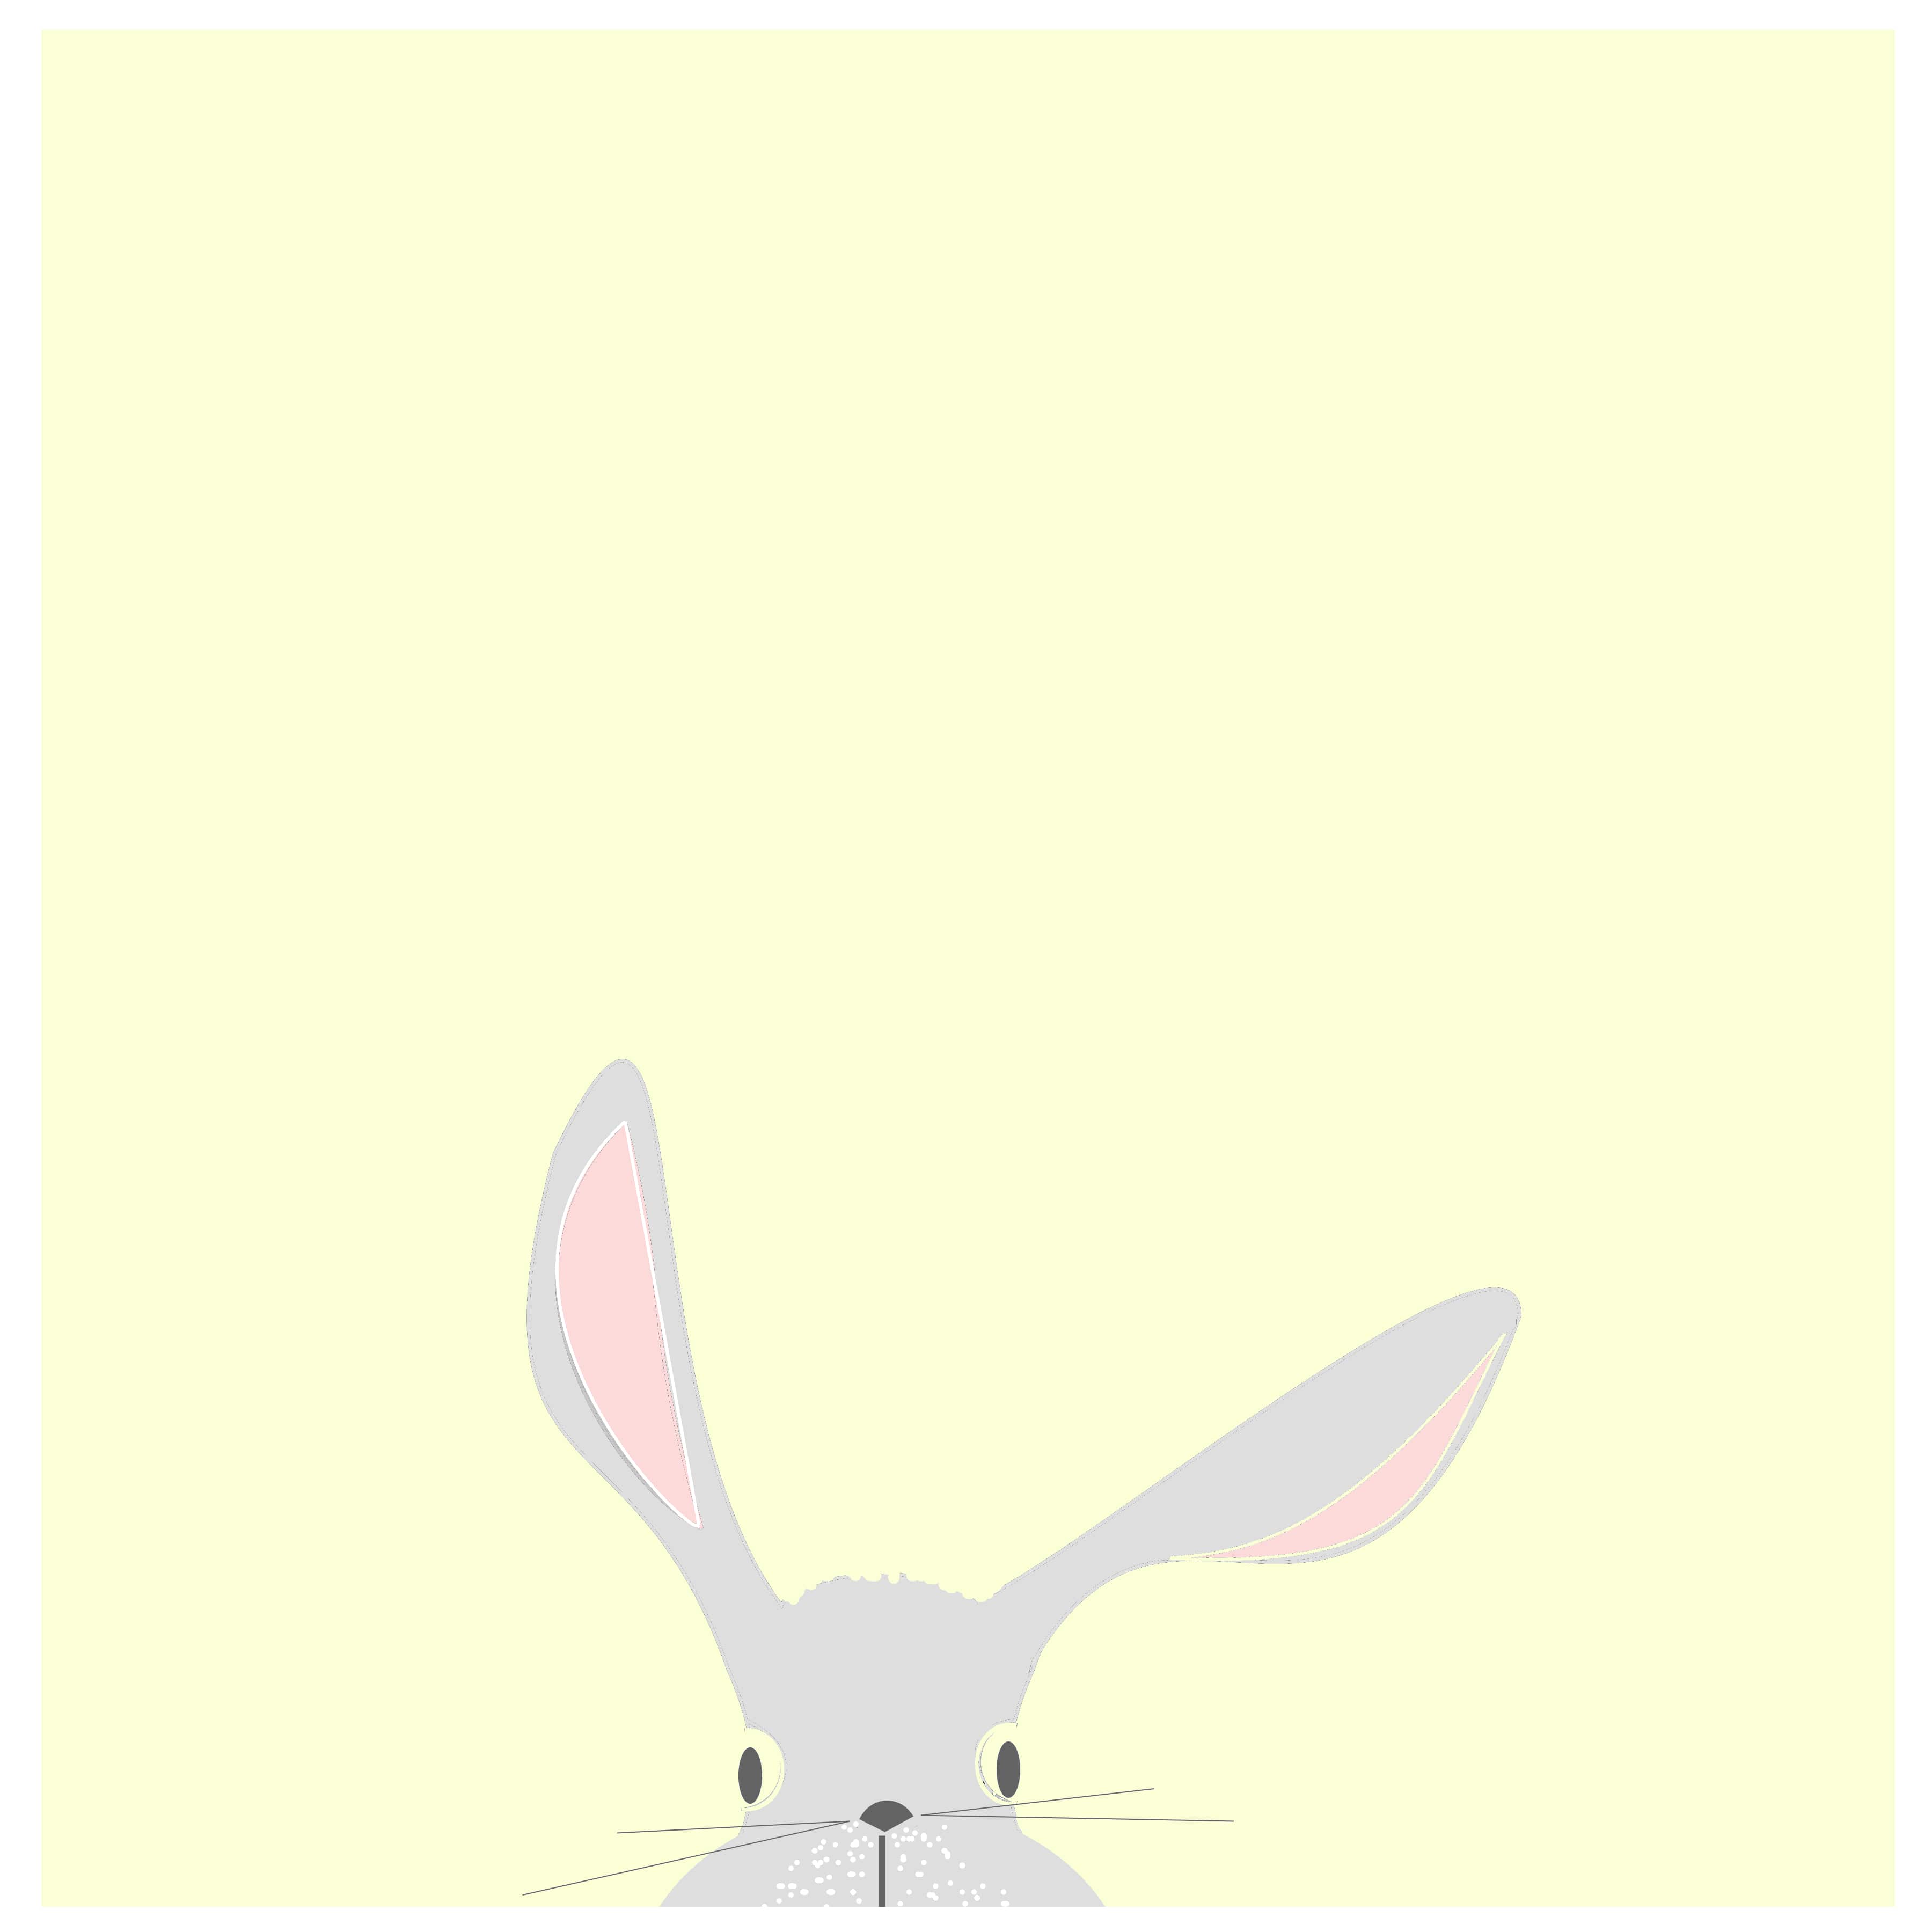 Jane Cowles, Rabbit with Long Ears